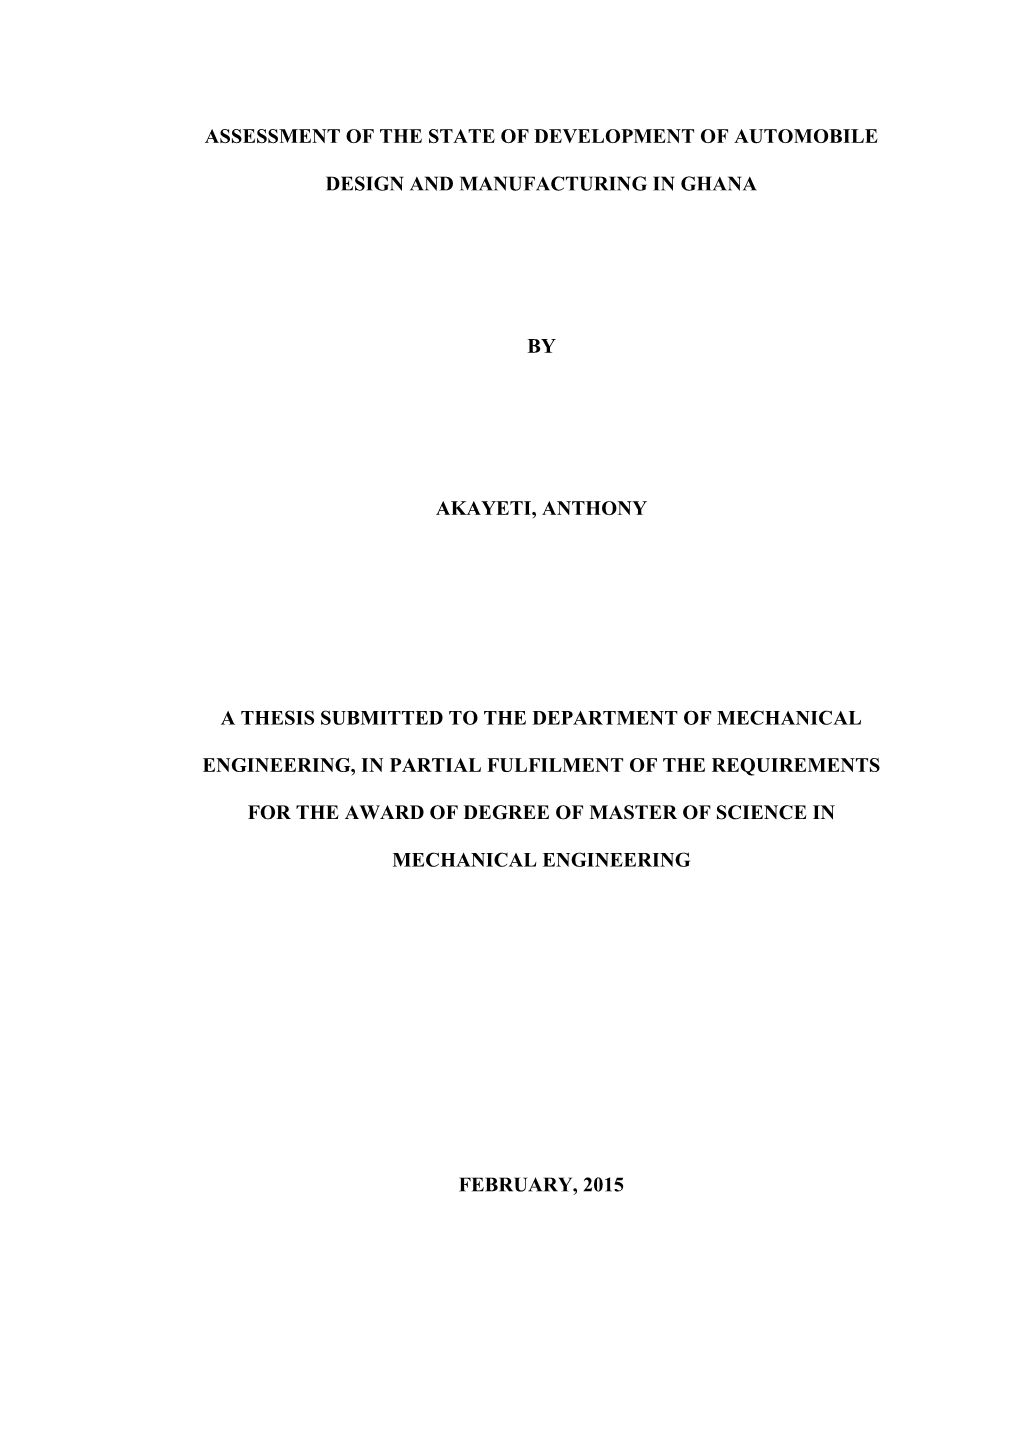 Assessment of the State of Development of Automobile